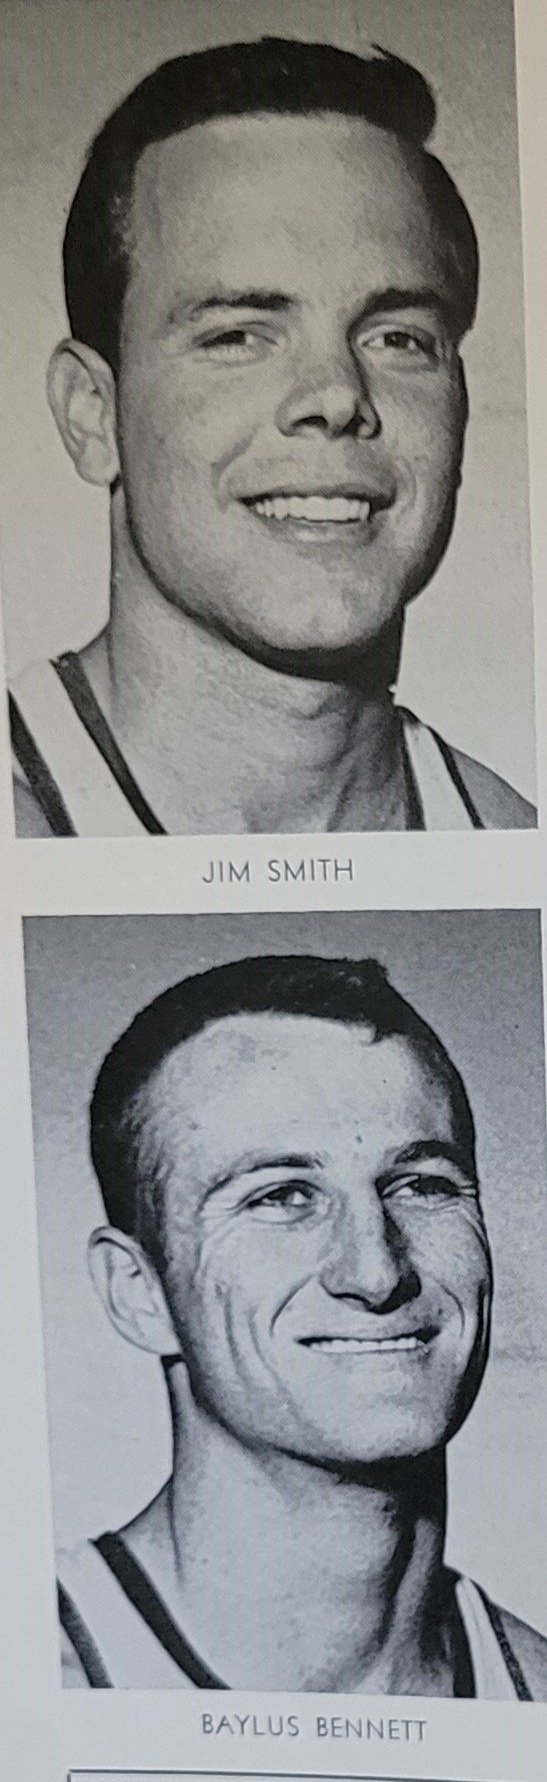 1962 Captains Jim Smith and Bayless Bennett